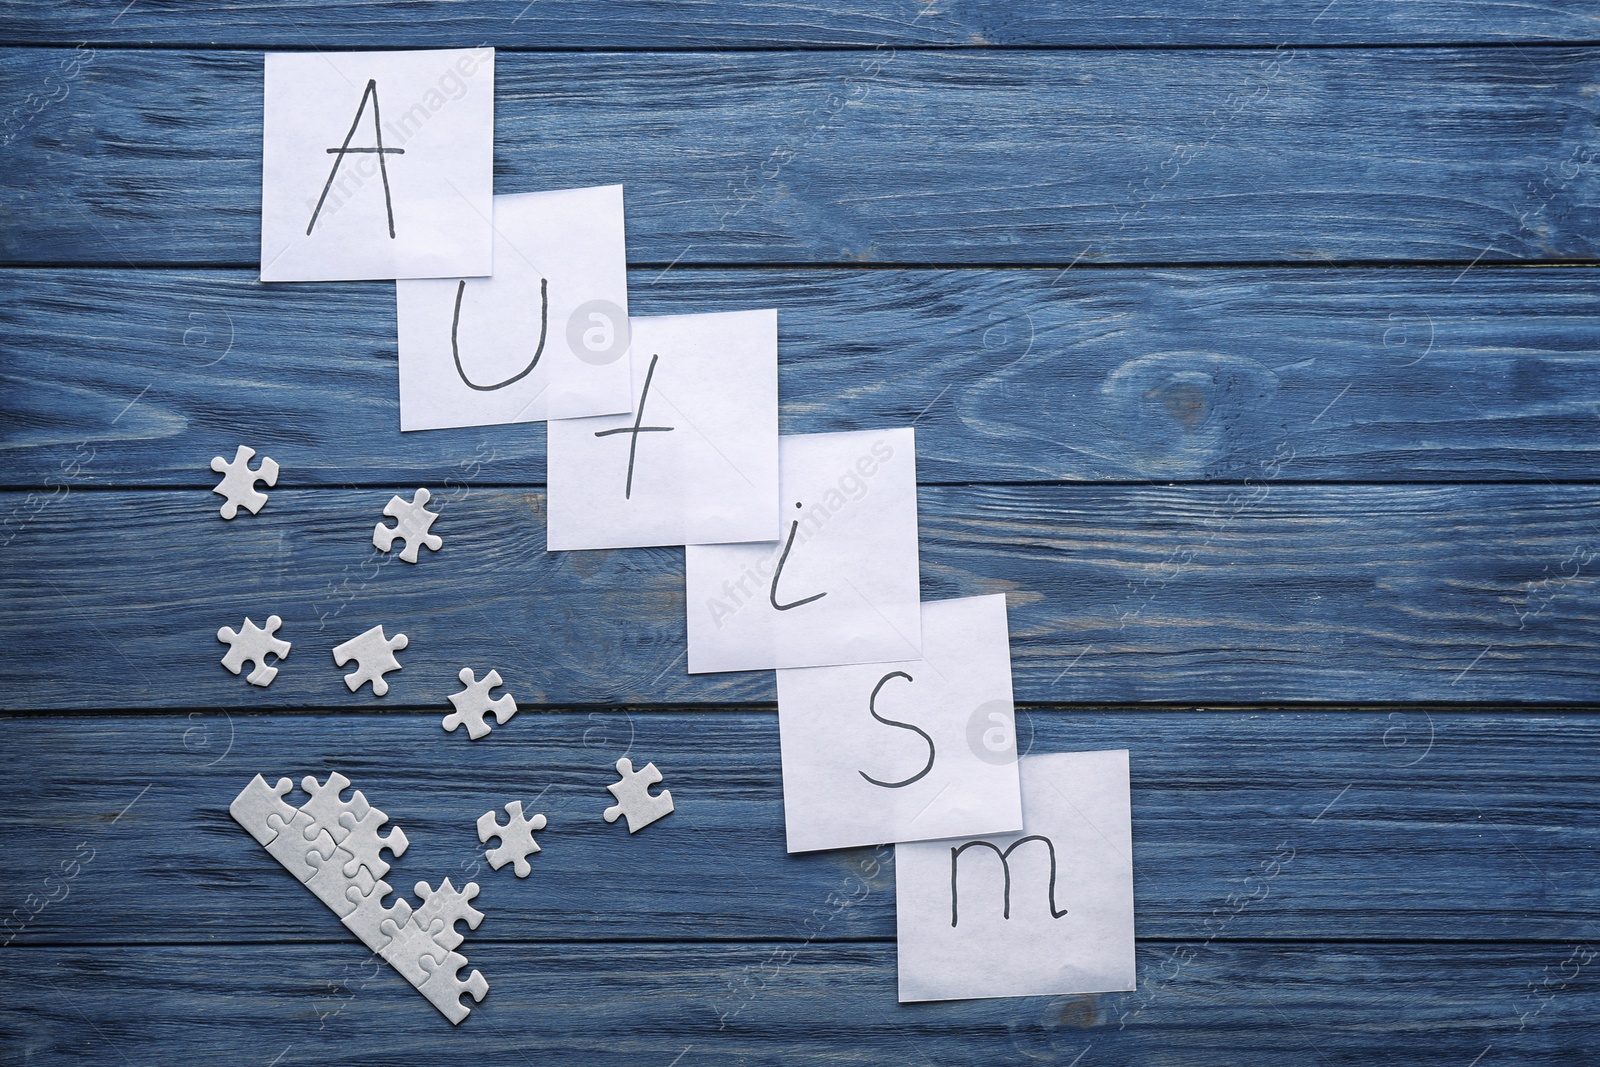 Photo of Notes with word "Autism" and puzzle pieces on wooden background